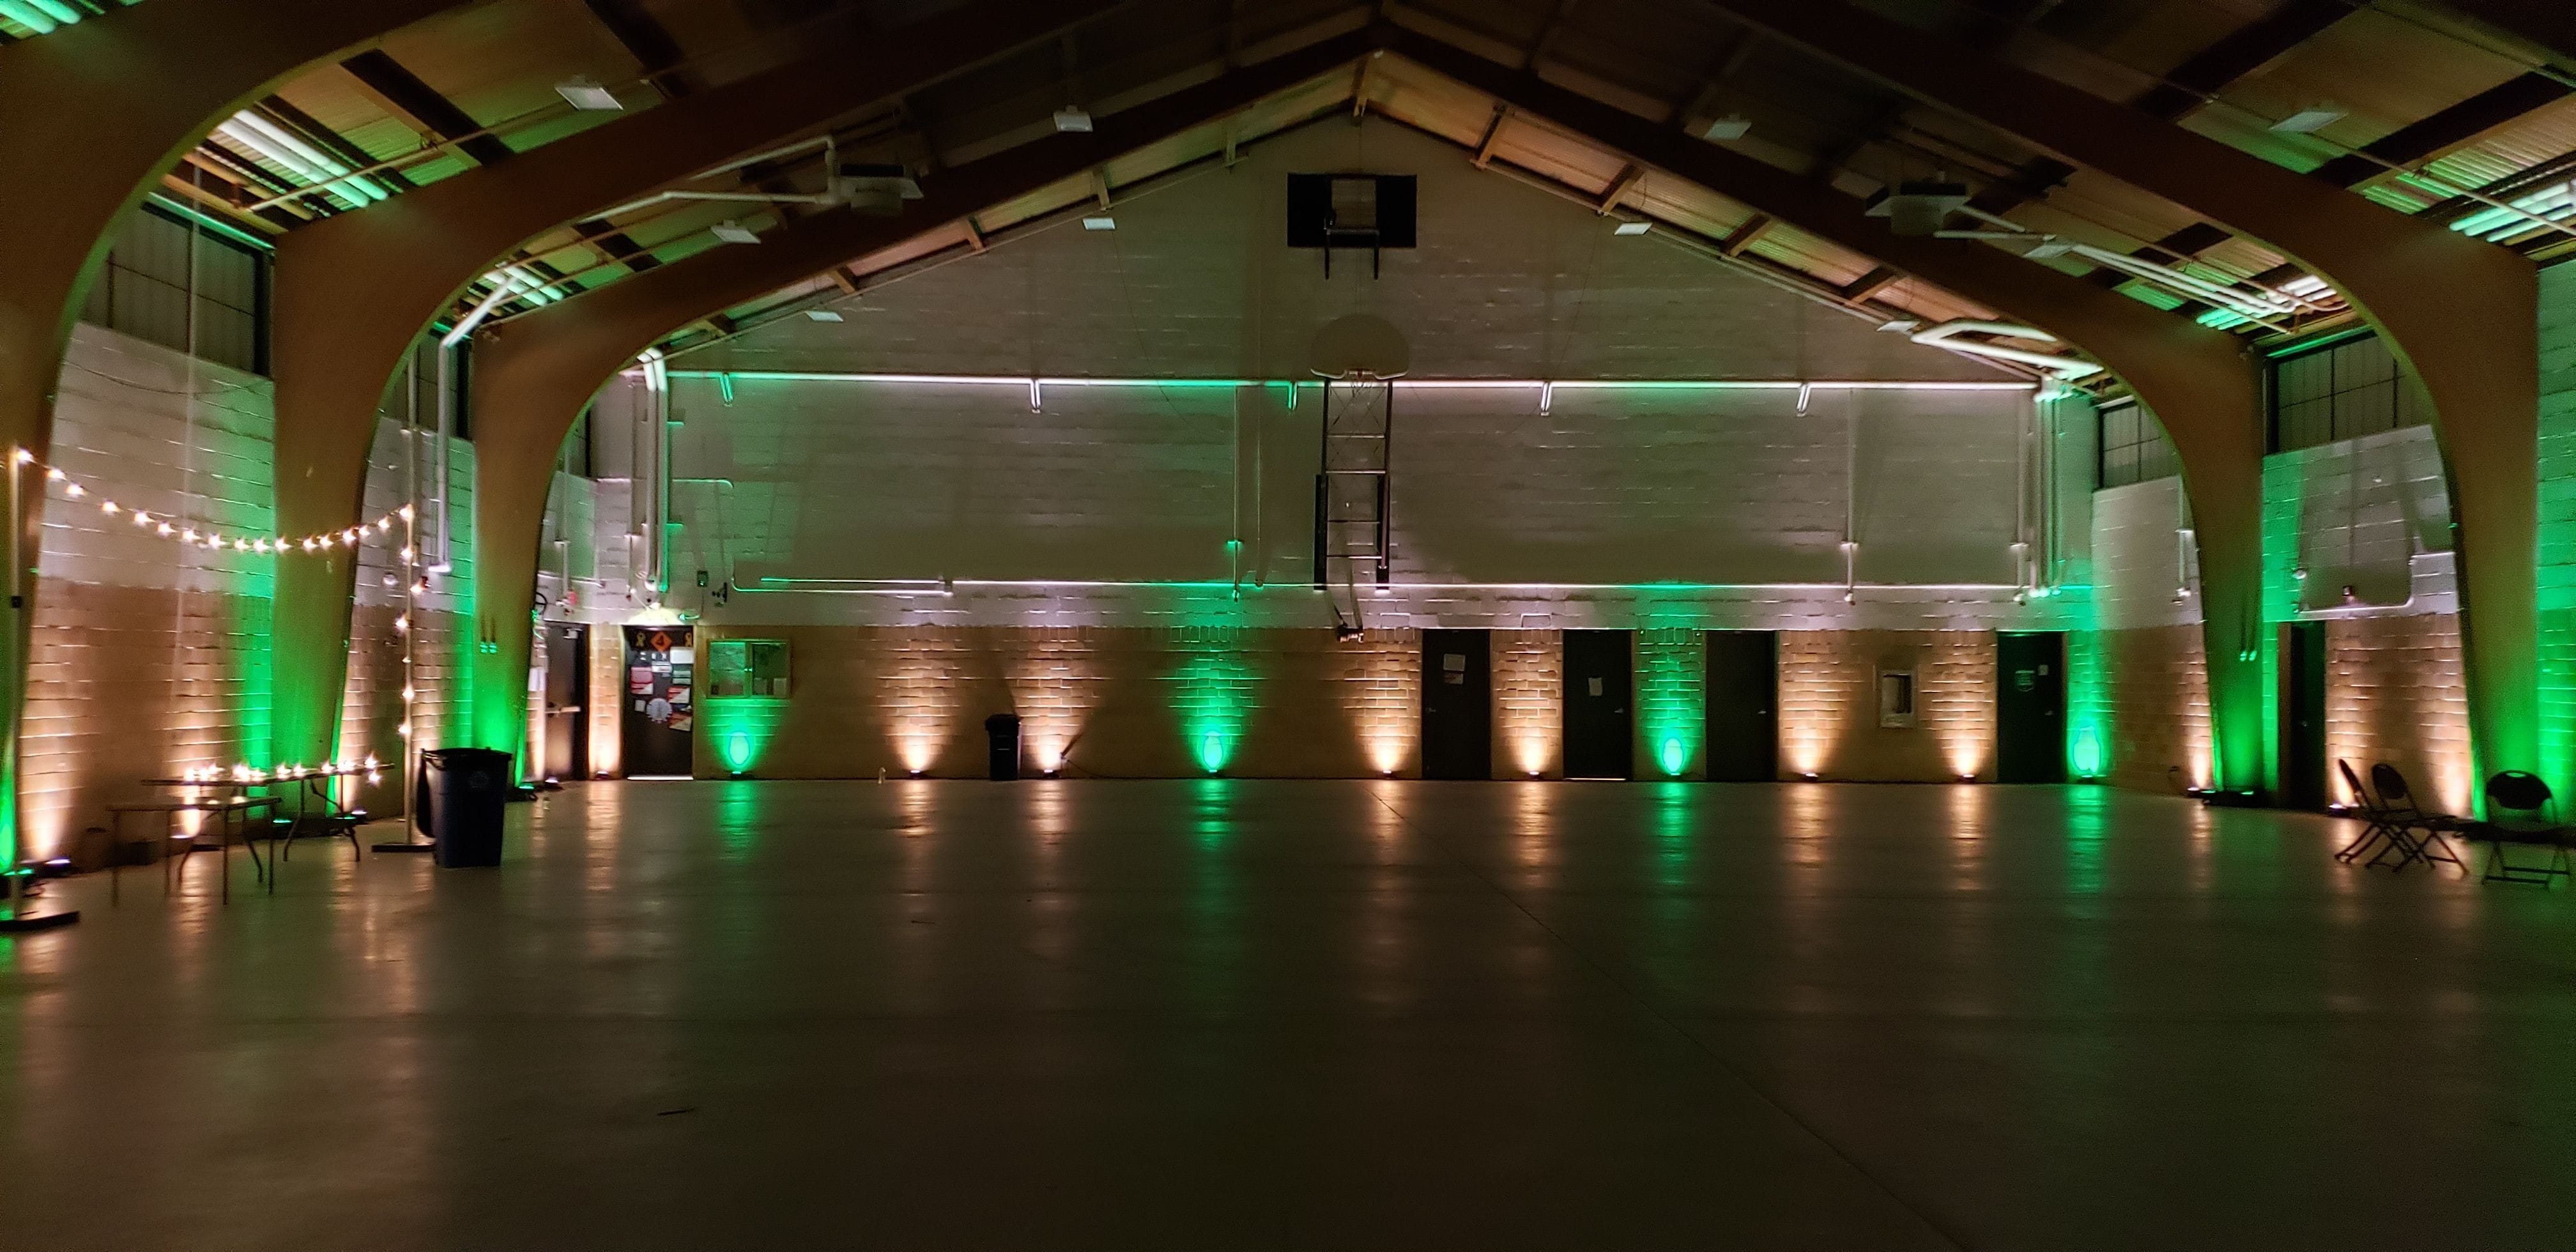 Wedding lighting at the Cloquet Armory by Duluth Event Lighting. Up lighting in green and soft white.